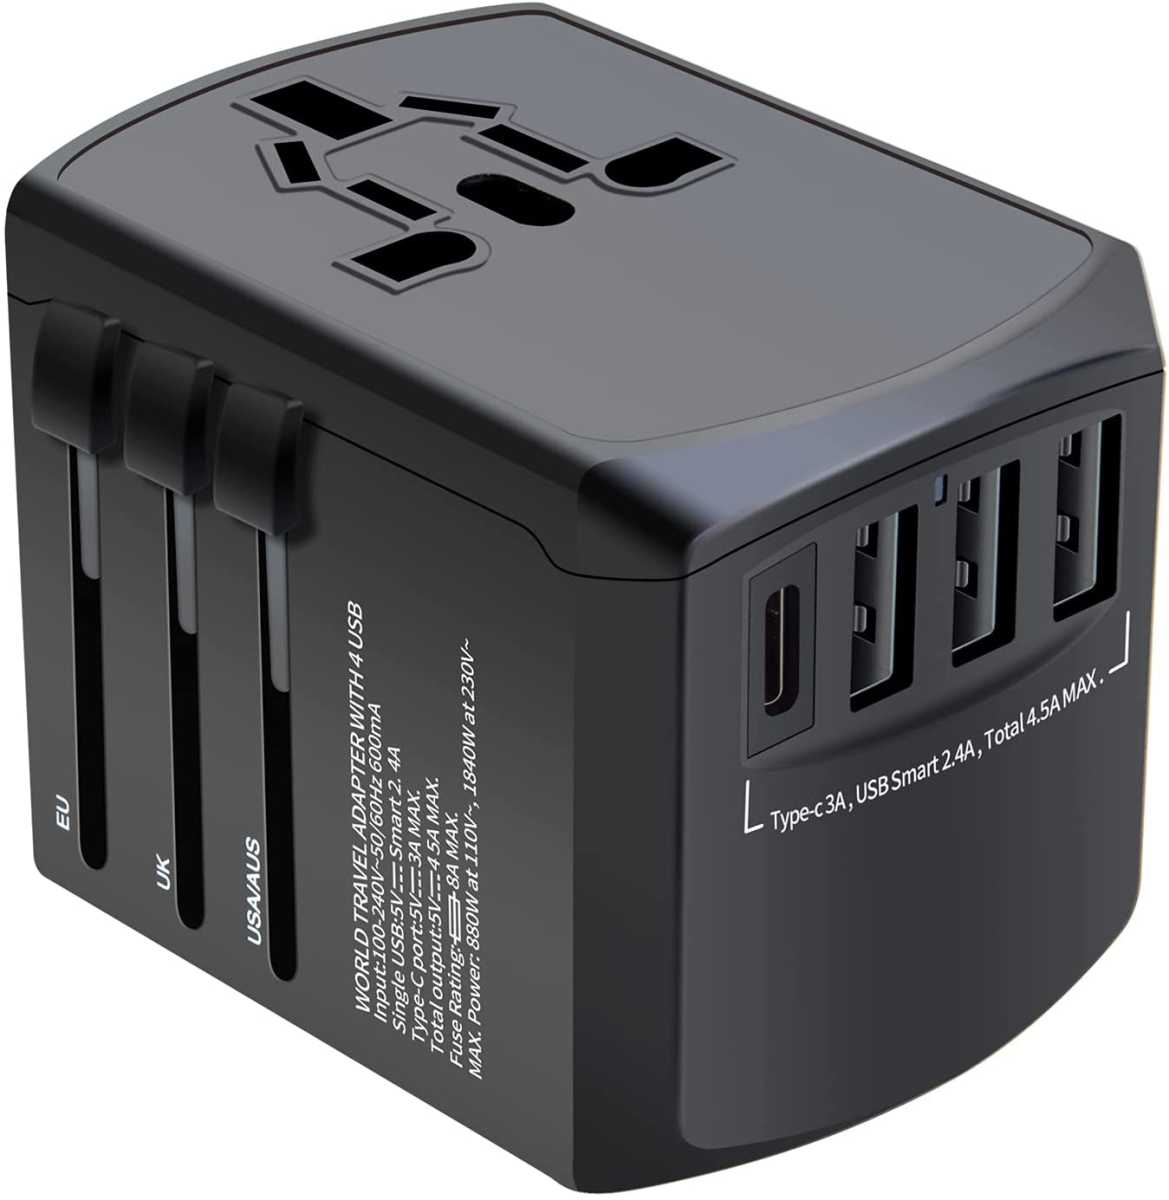 does apple world travel adapter kit work in italy